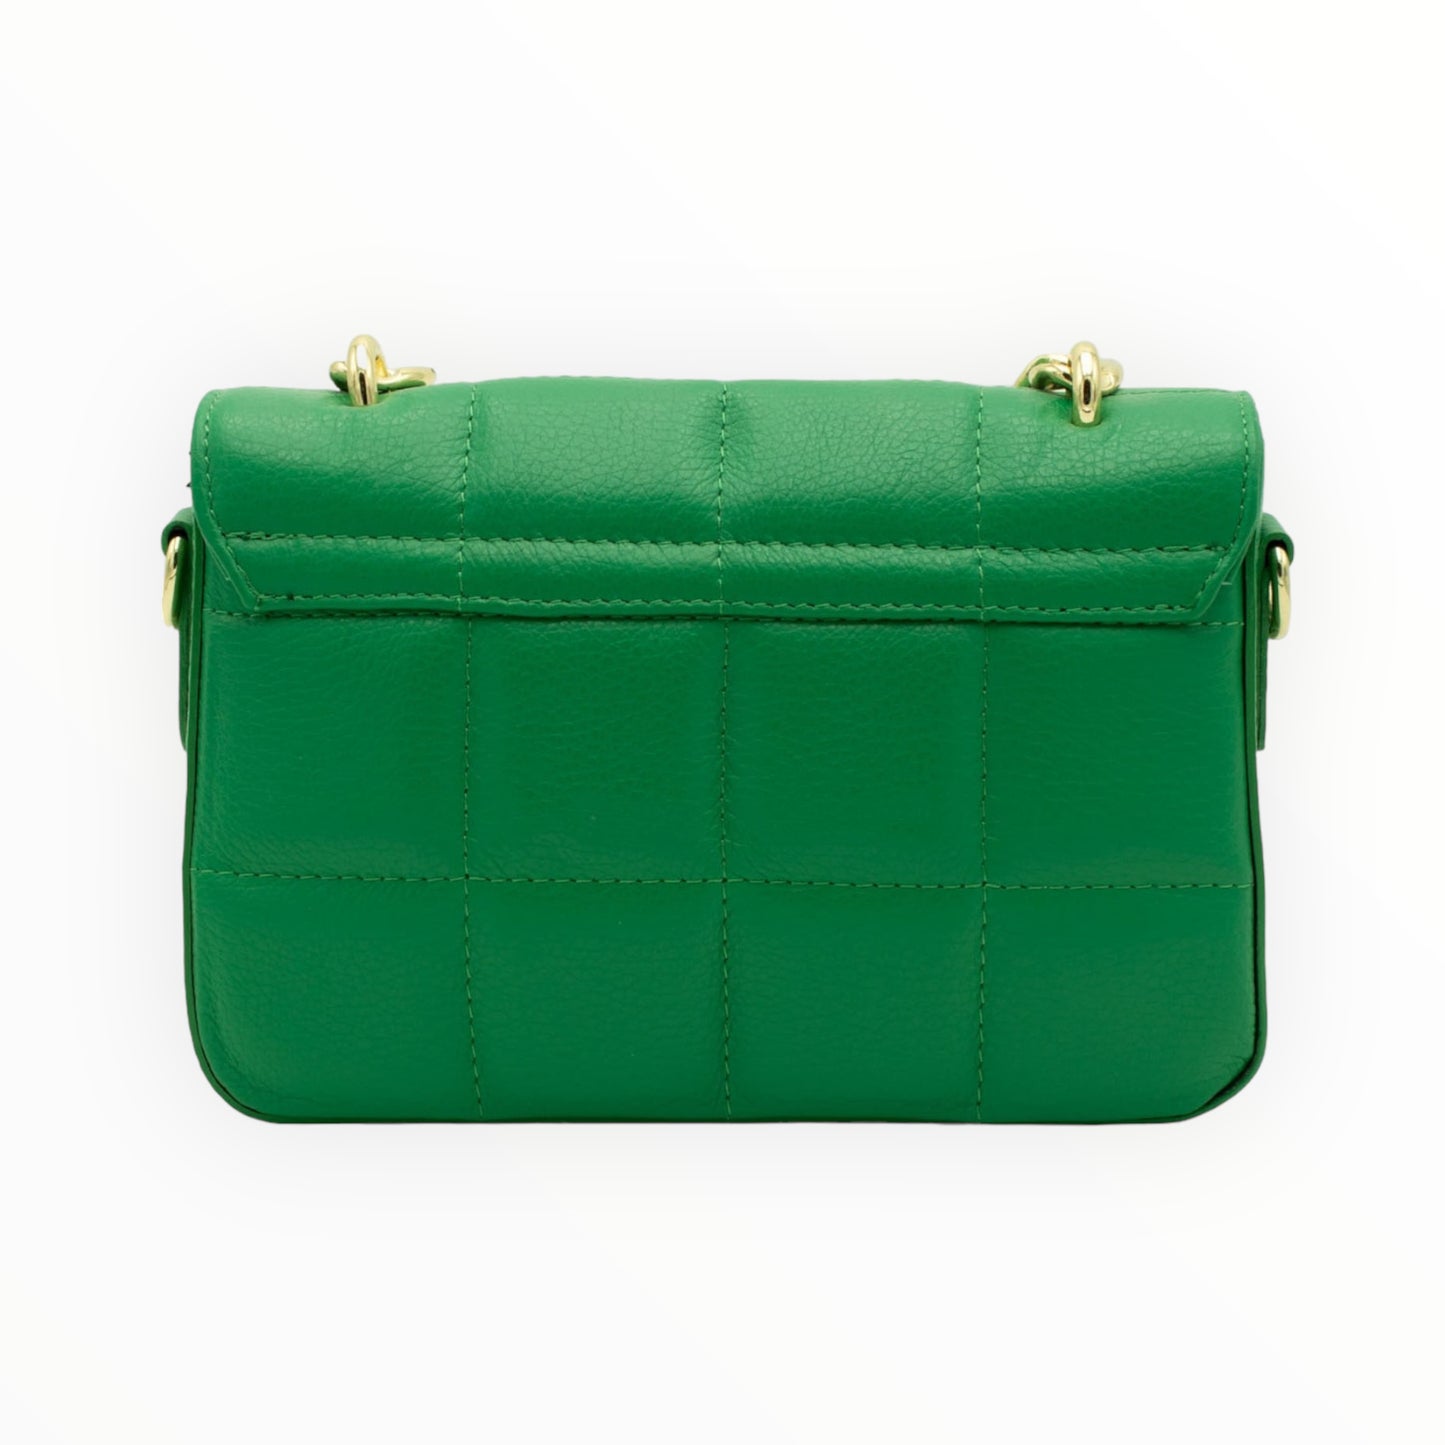 Verity Quilted Leather Bag